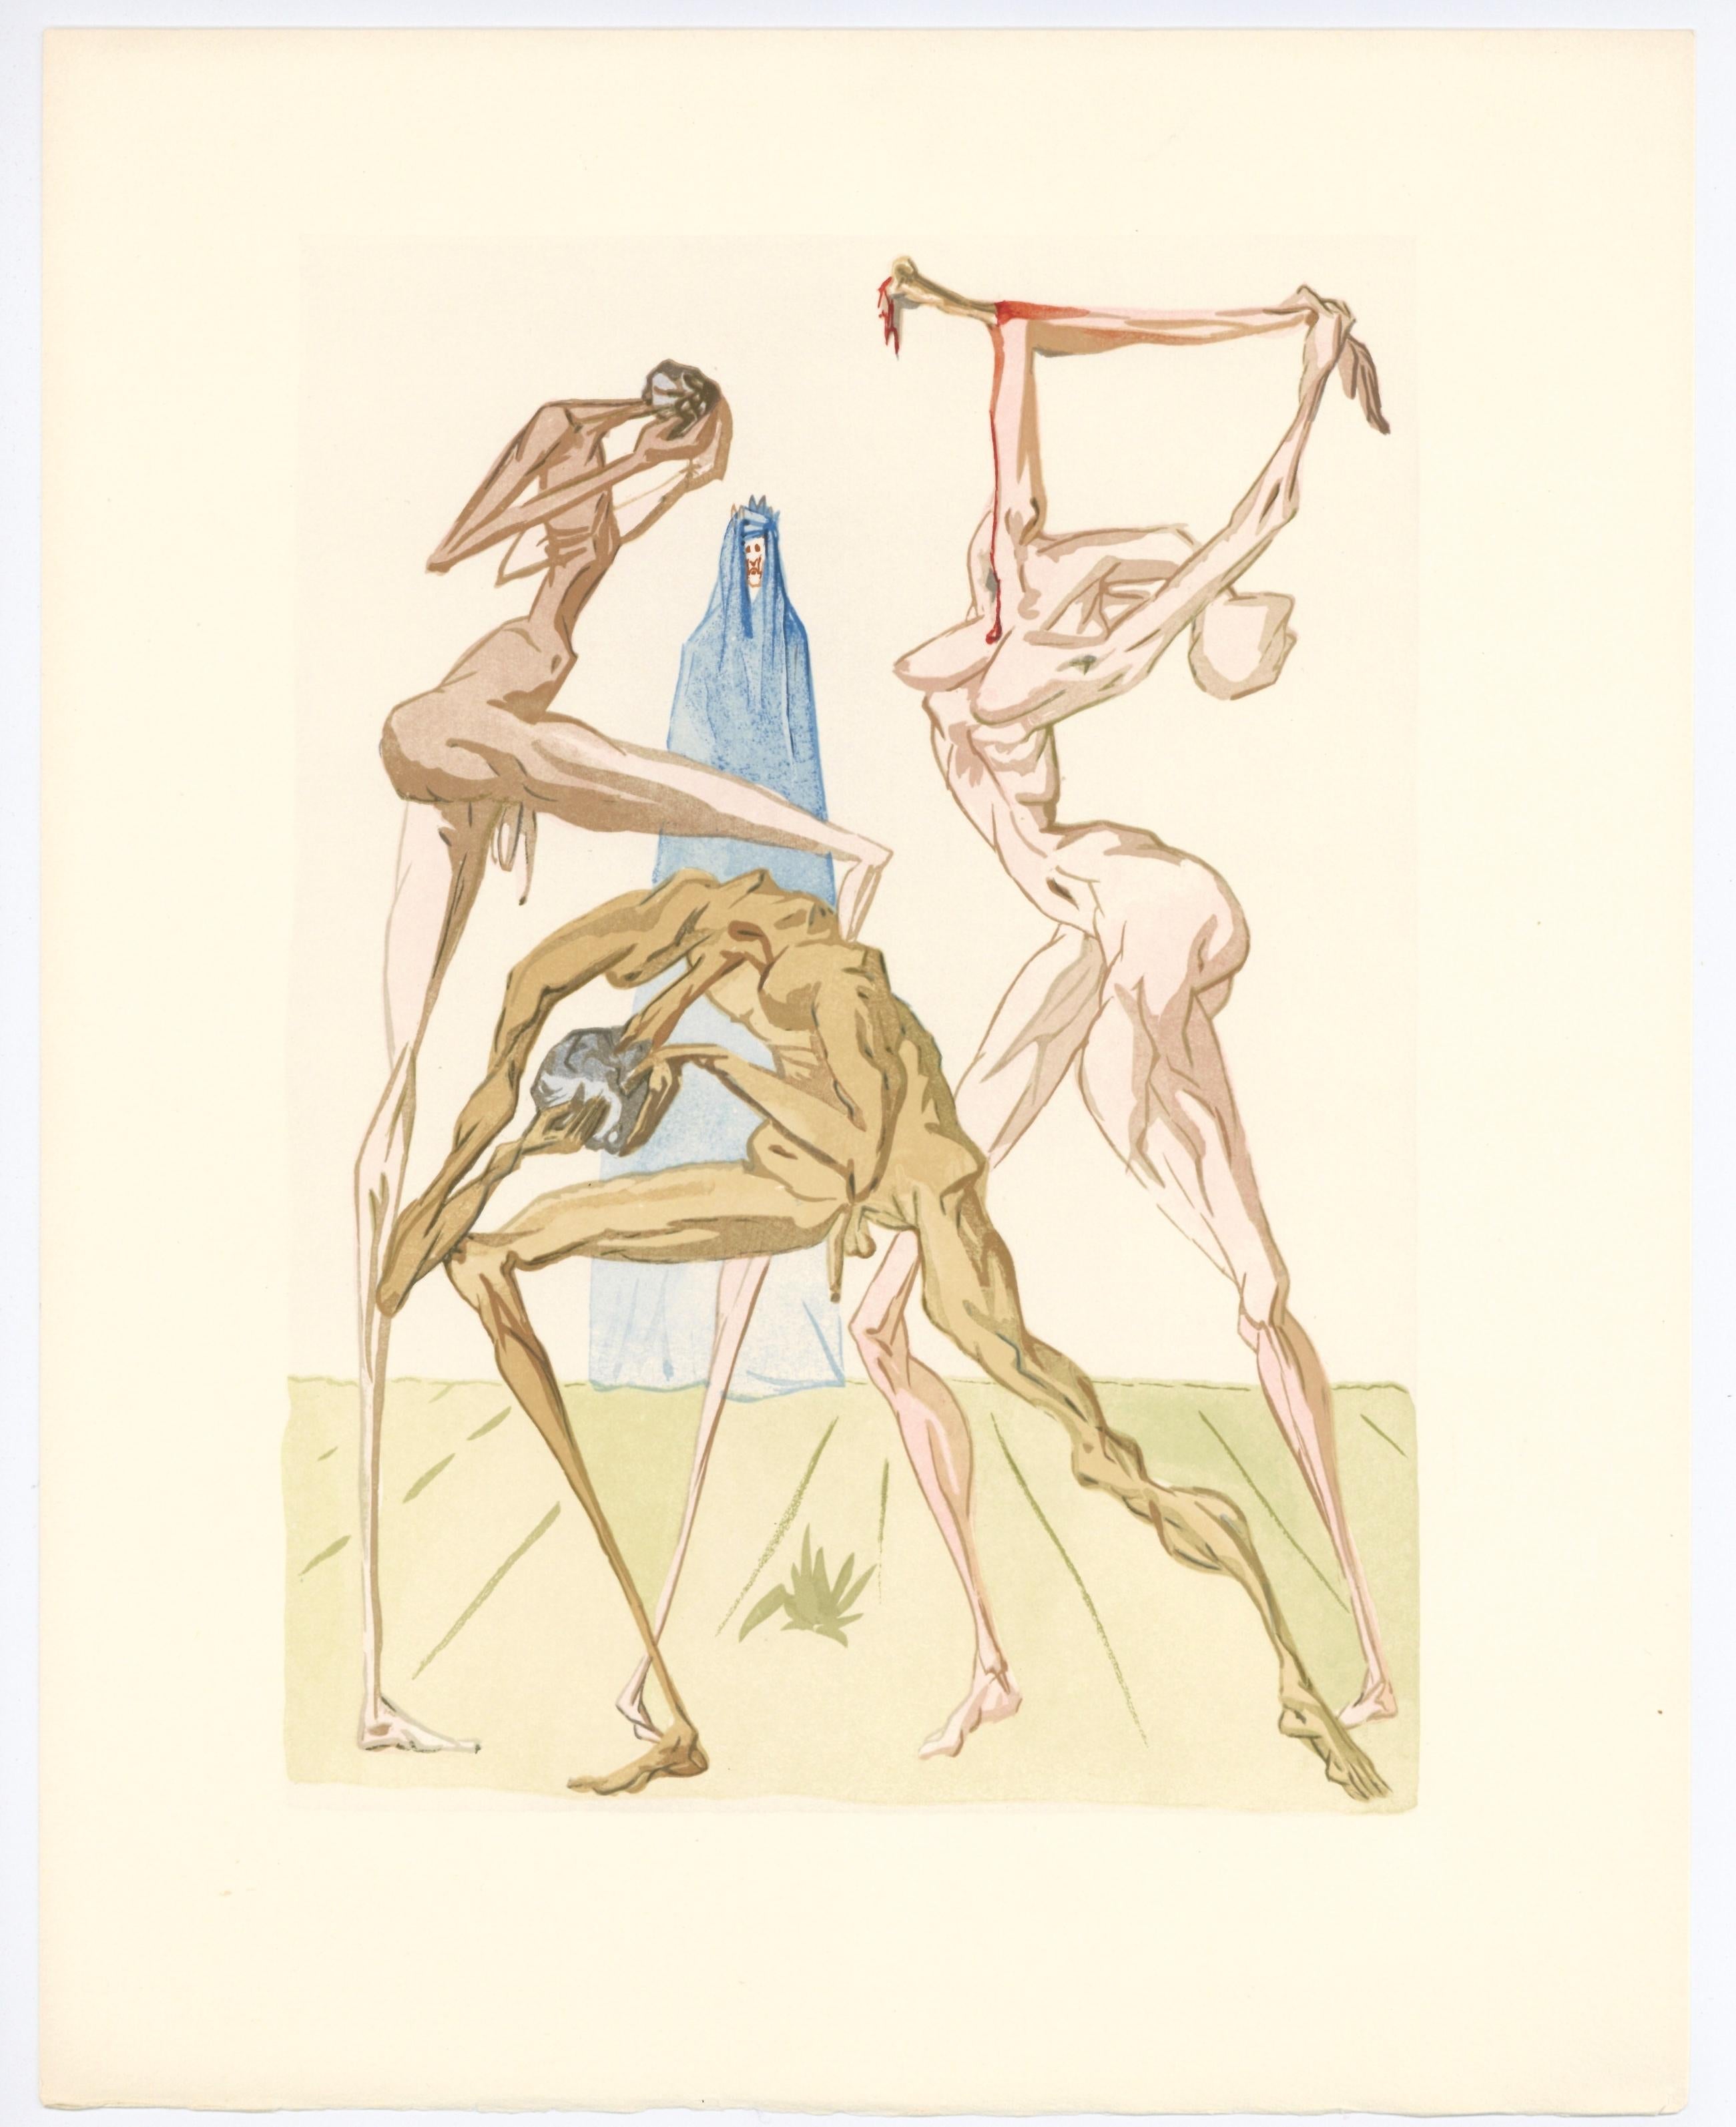 "The Sodomites" Divine Comedy woodblock engraving  - Print by Salvador Dalí